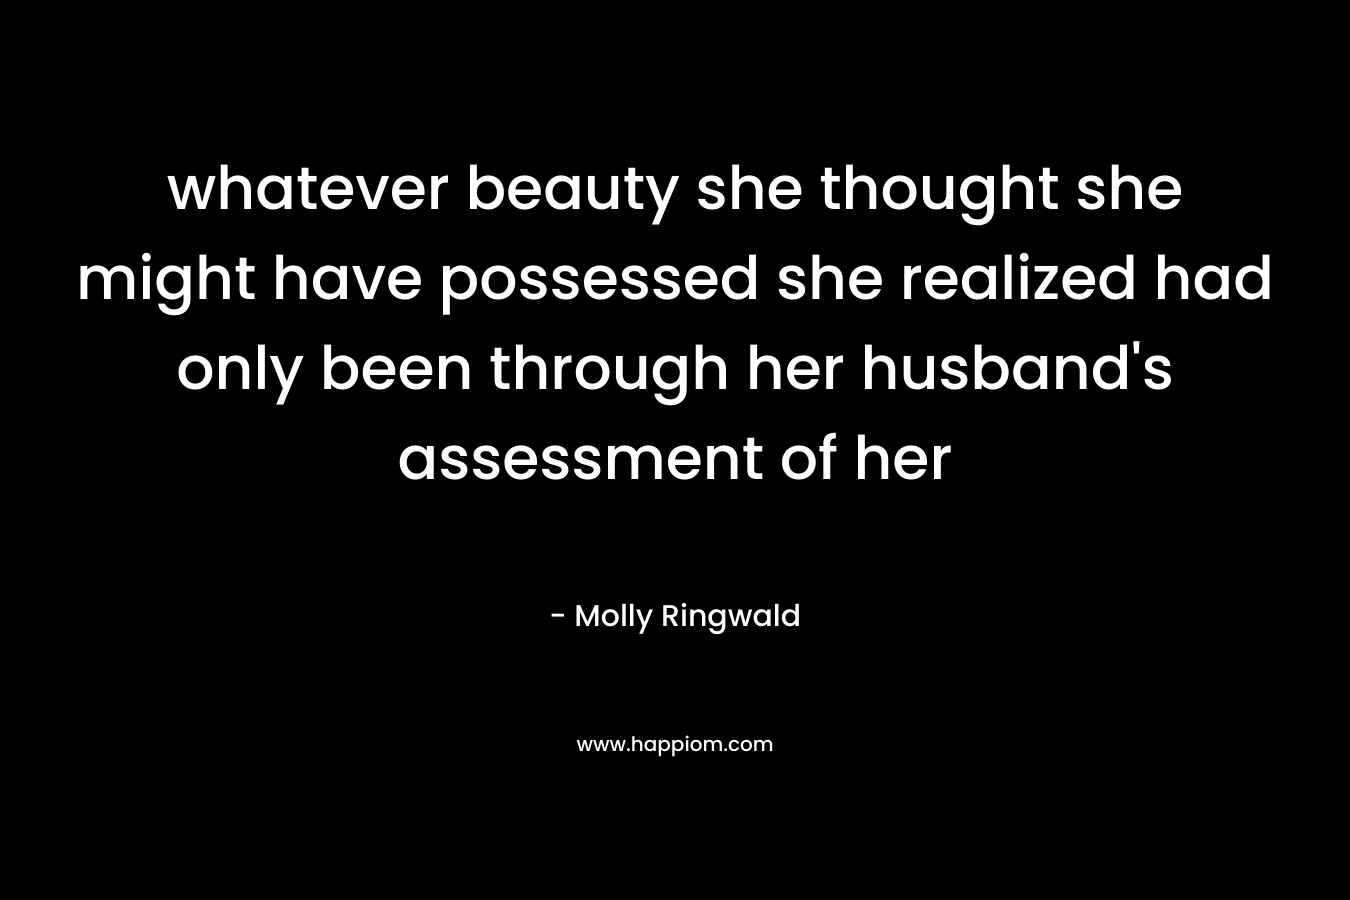 whatever beauty she thought she might have possessed she realized had only been through her husband's assessment of her